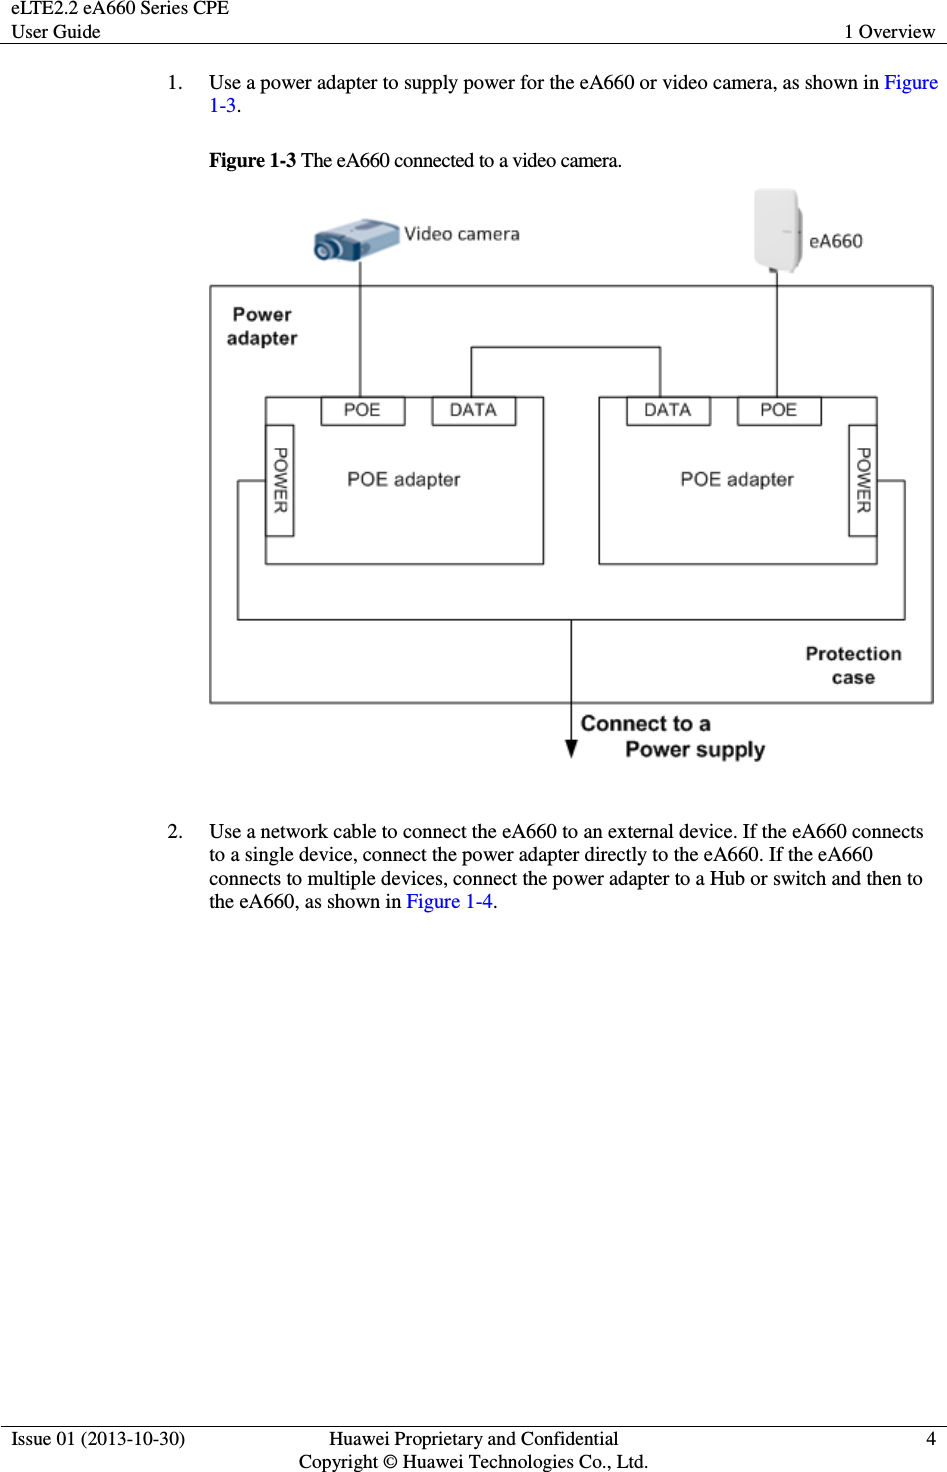 eLTE2.2 eA660 Series CPE User Guide  1 Overview  Issue 01 (2013-10-30)  Huawei Proprietary and Confidential                                     Copyright © Huawei Technologies Co., Ltd. 4  1. Use a power adapter to supply power for the eA660 or video camera, as shown in Figure 1-3. Figure 1-3 The eA660 connected to a video camera.   2. Use a network cable to connect the eA660 to an external device. If the eA660 connects to a single device, connect the power adapter directly to the eA660. If the eA660 connects to multiple devices, connect the power adapter to a Hub or switch and then to the eA660, as shown in Figure 1-4.    